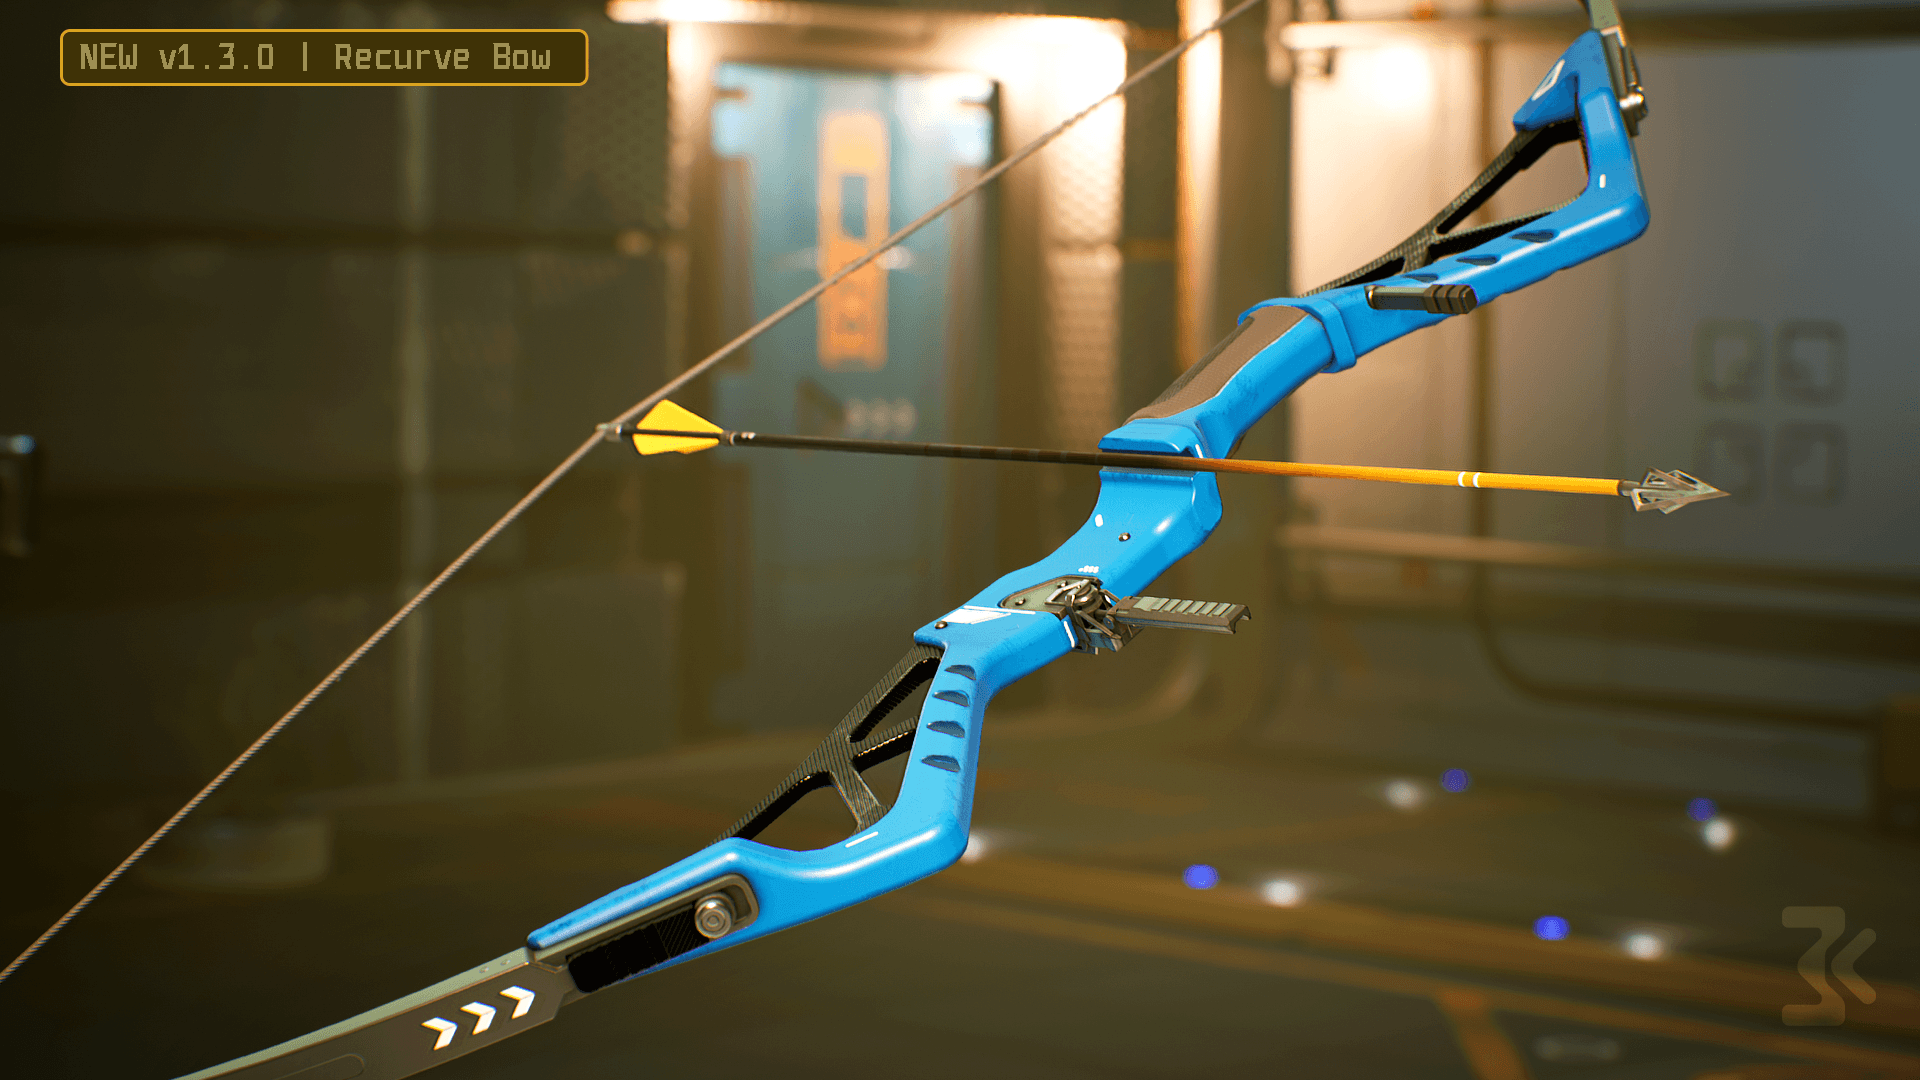 Marketplace_Gallery_RecurveBow01.png